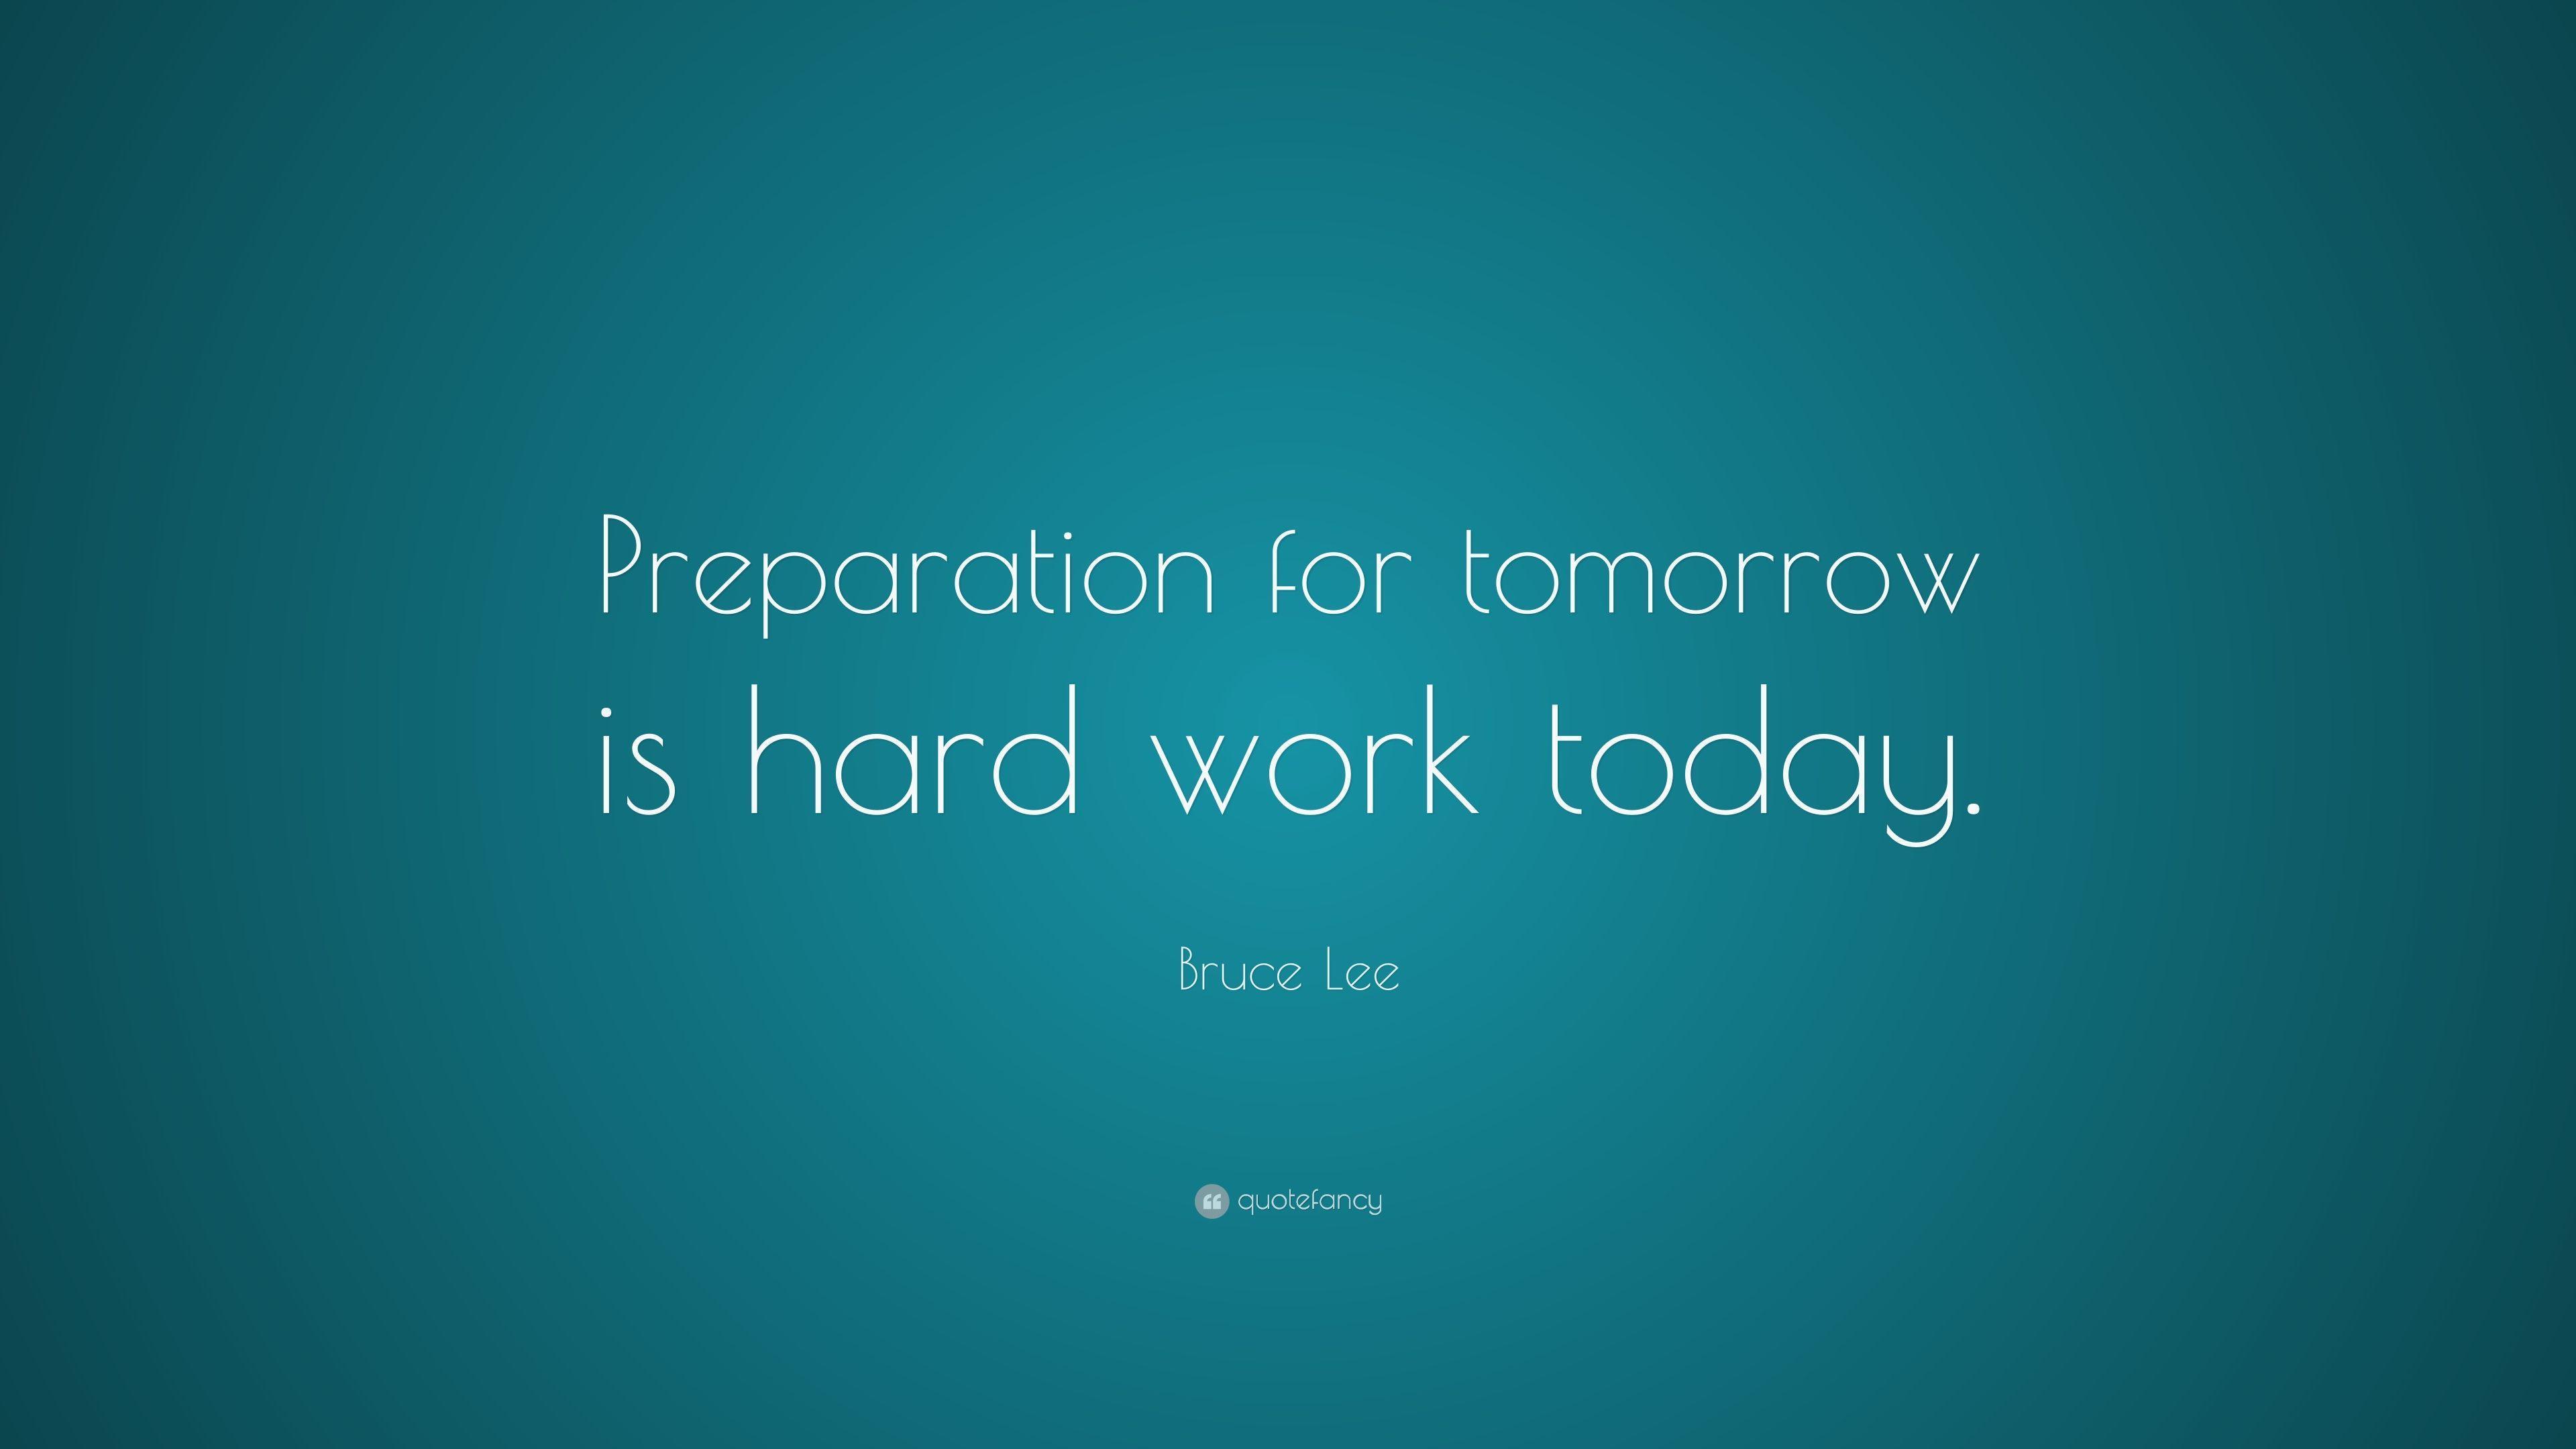 Preparation for tomorrow is hard work .quotefancy.com